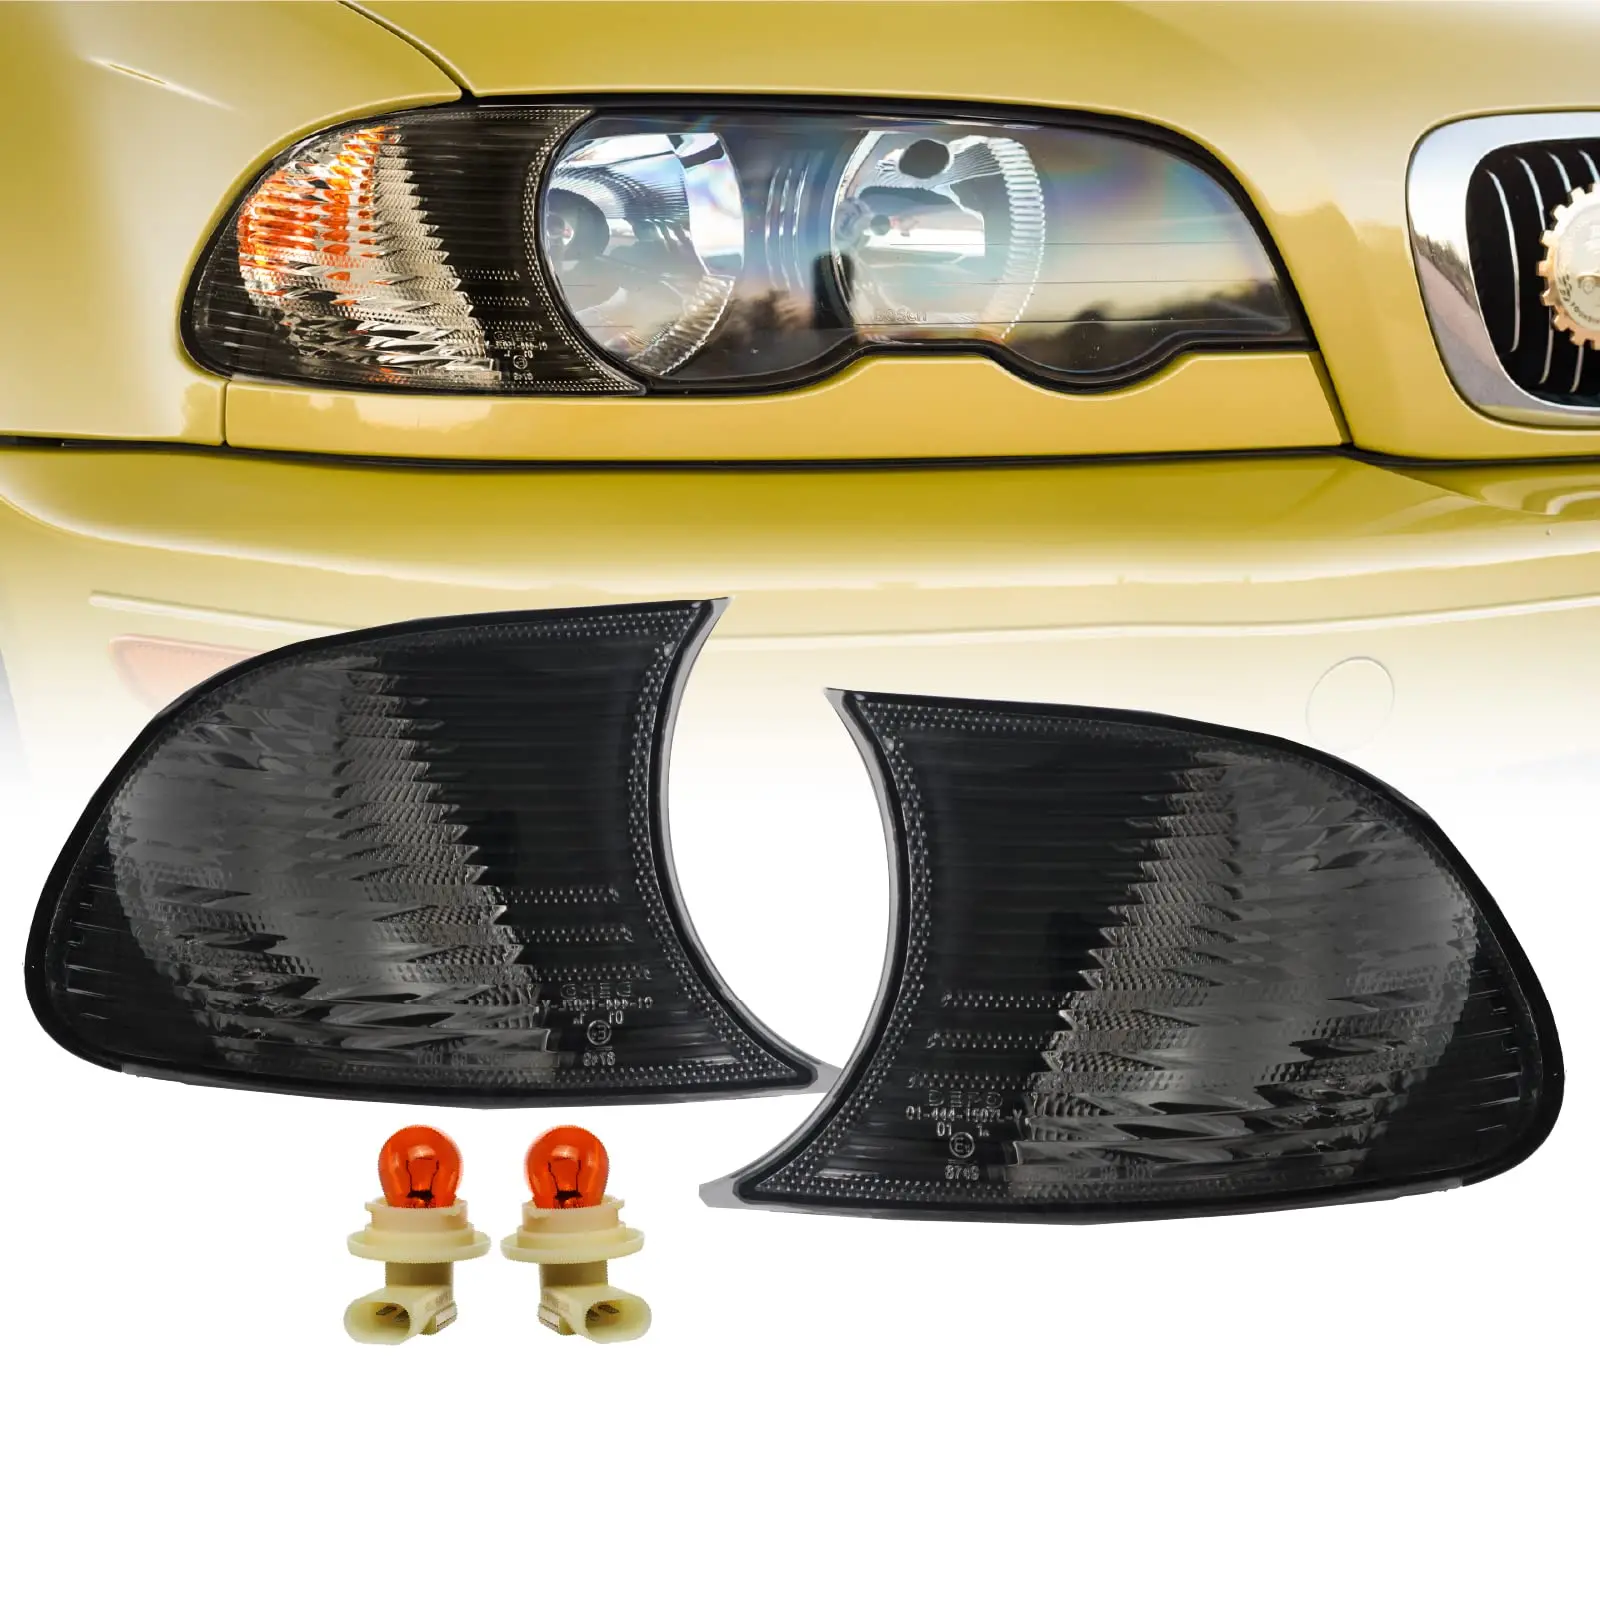 e46 smoked corner lights - What cars have cornering lights